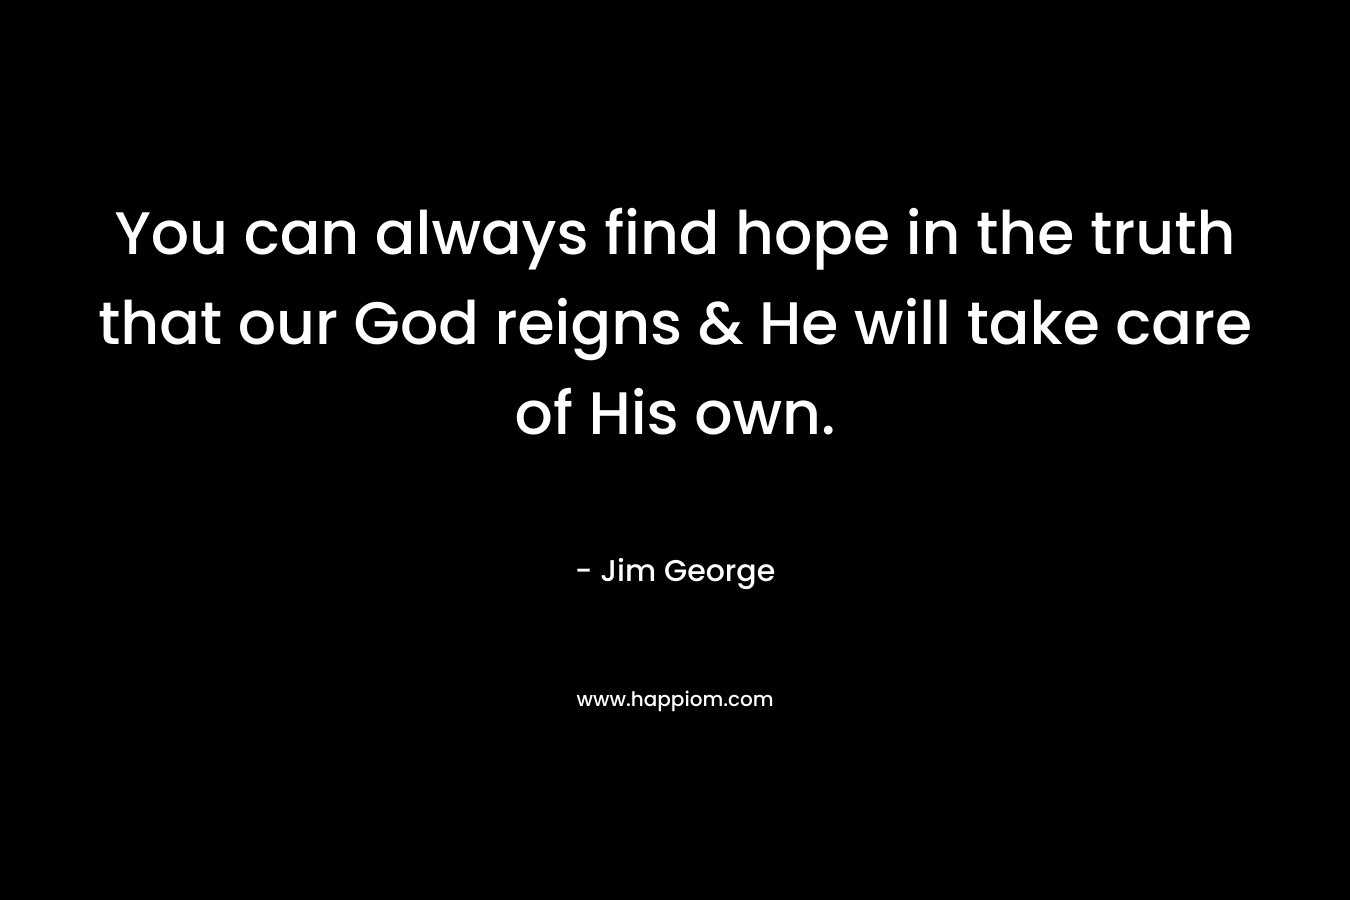 You can always find hope in the truth that our God reigns & He will take care of His own.